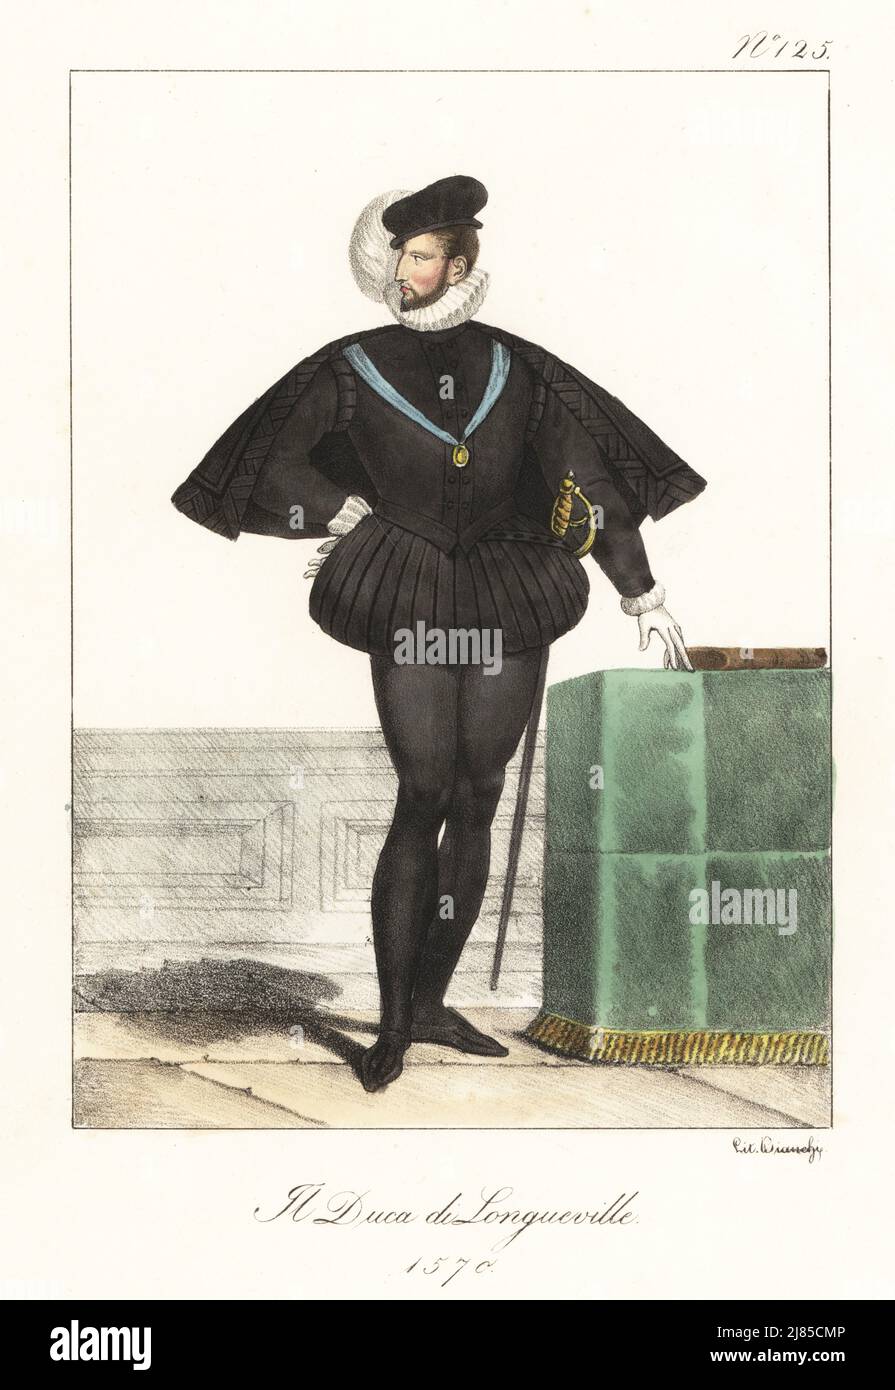 Leonor d'Orleans, Duke of Longueville, 1540-1573. Governor of Picardy and Normandy and military leader during the French Wars of Religion In plumed cap, black cape, doublet, breeches, hose, with sword. Le Duc de Longueville, 1570. Handcoloured lithograph by Lorenzo Bianchi after Hippolyte Lecomte from Costumi civili e militari della monarchia francese dal 1200 al 1820, Naples, 1825. Italian edition of Lecomte’s Civilian and military costumes of the French monarchy from 1200 to 1820. Stock Photo